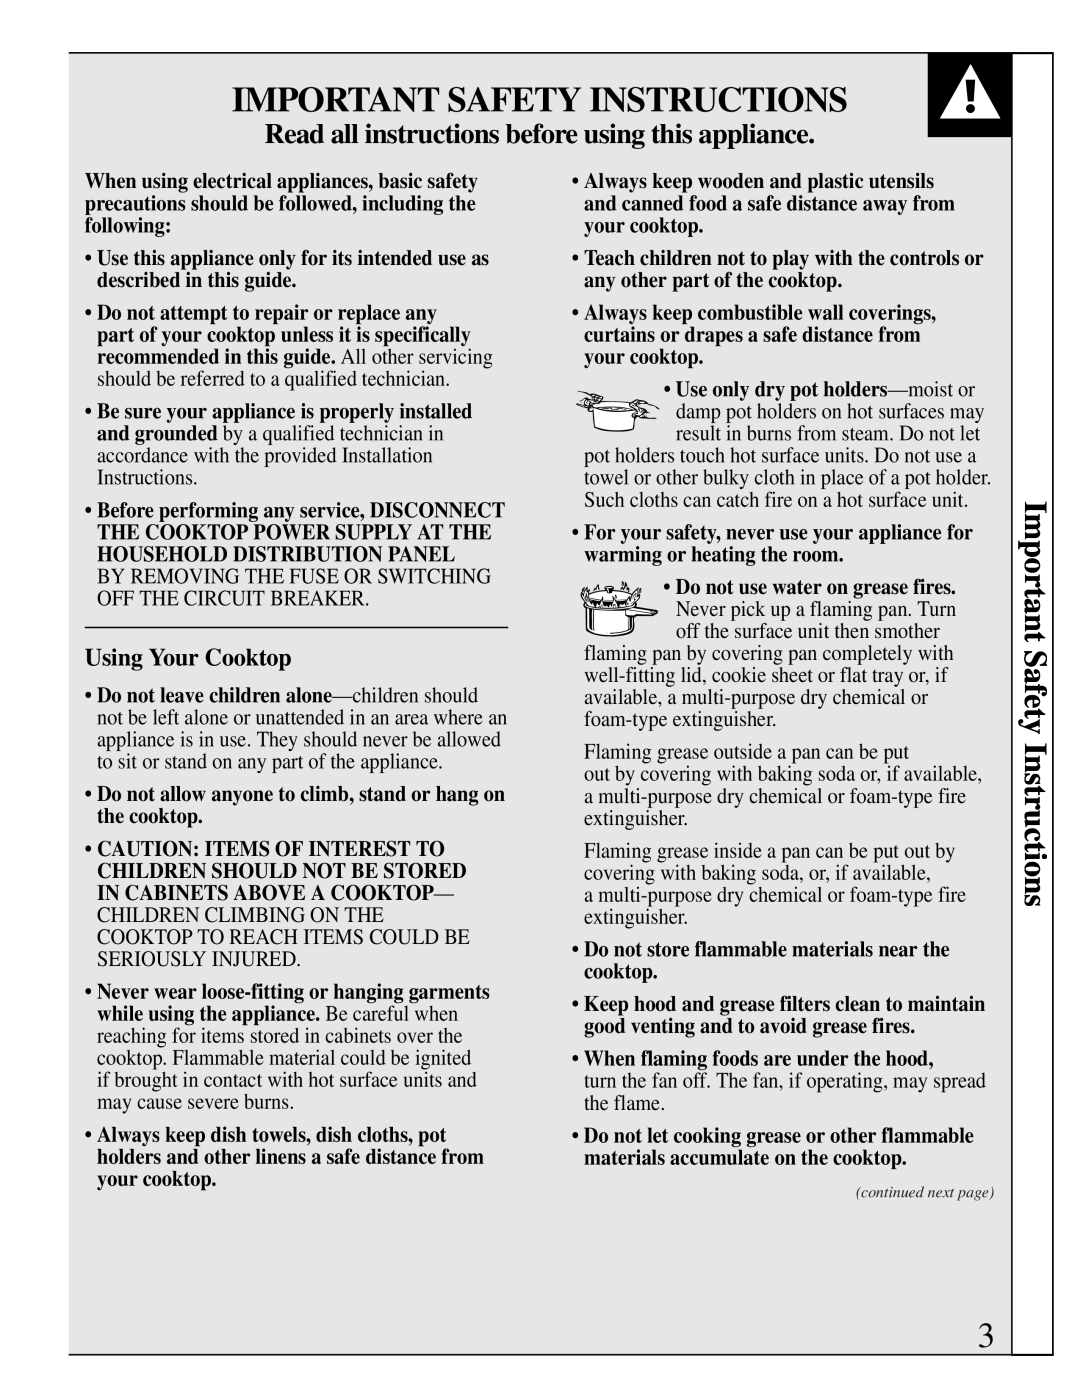 GE JP201, JP200 Important Safety Instructions, Using Your Cooktop, Read all instructions before using this appliance 